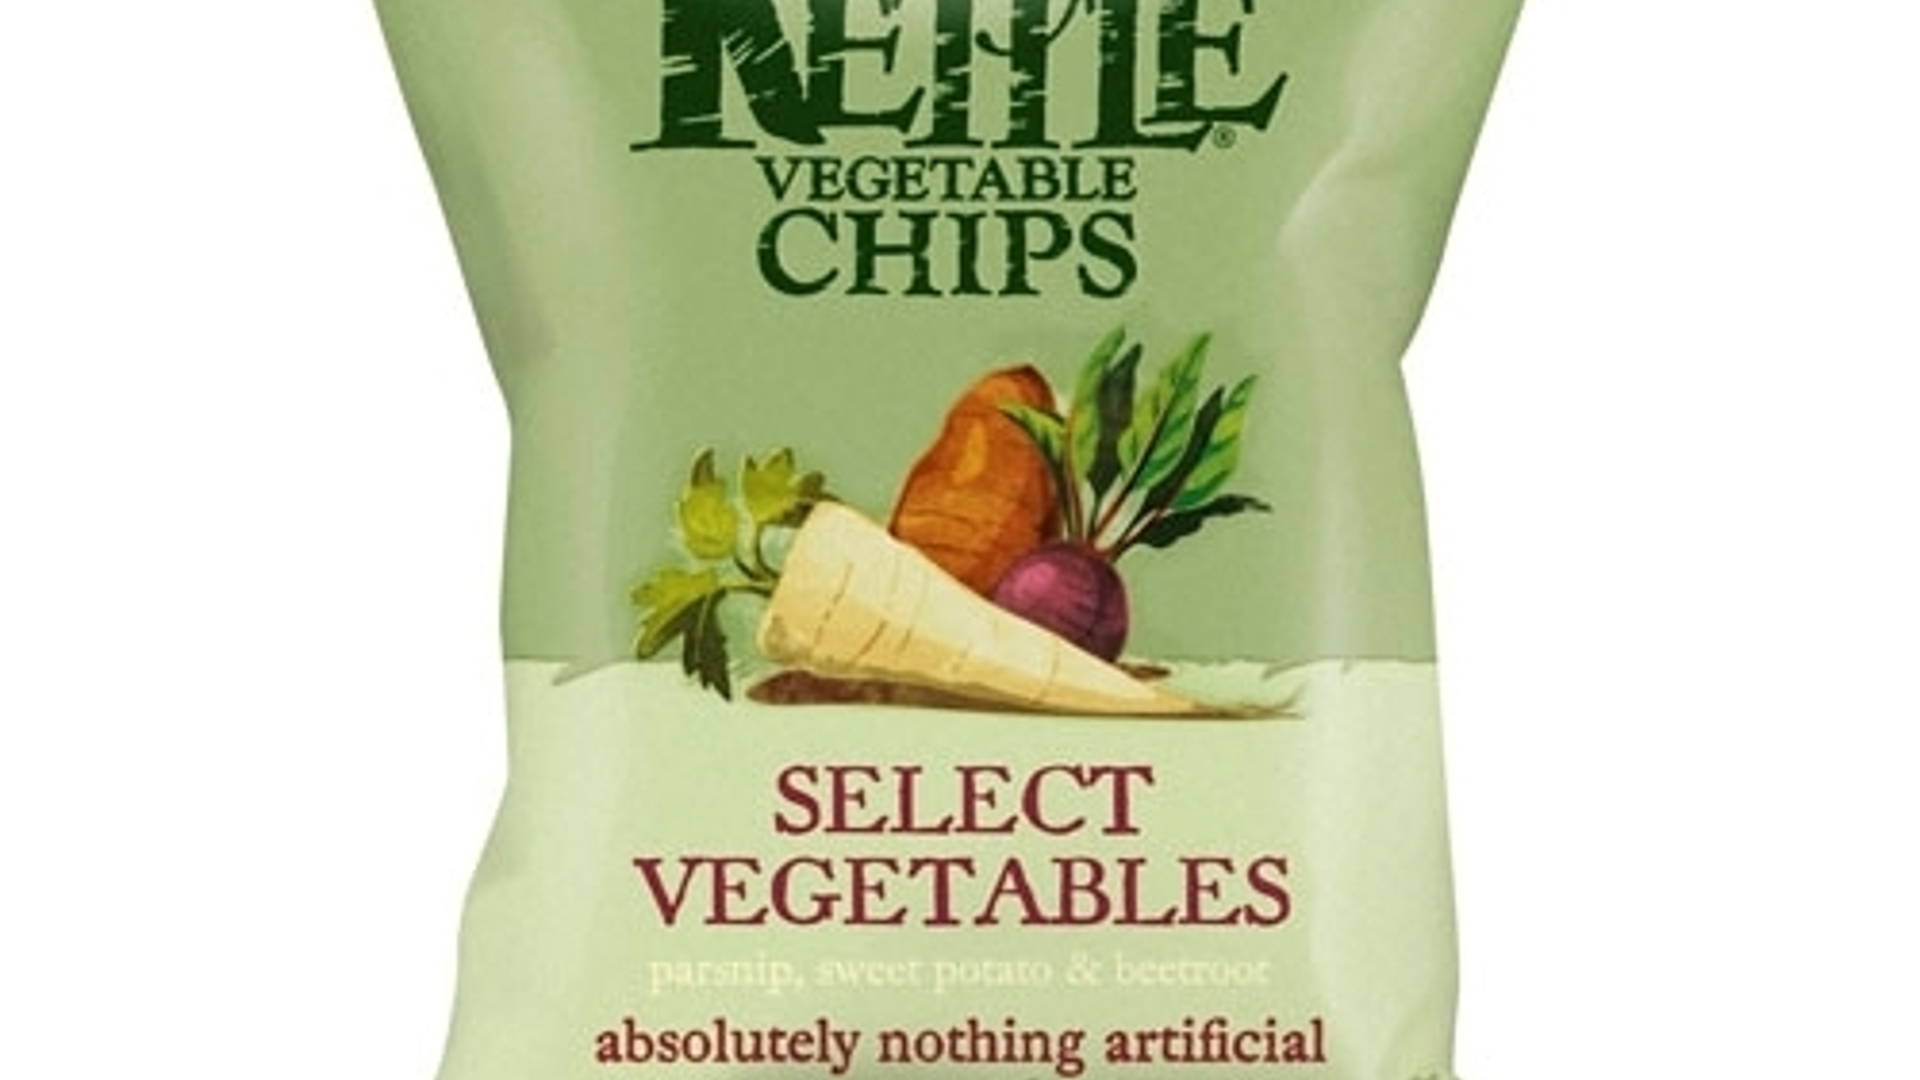 Featured image for Kettle Vegetable Chips